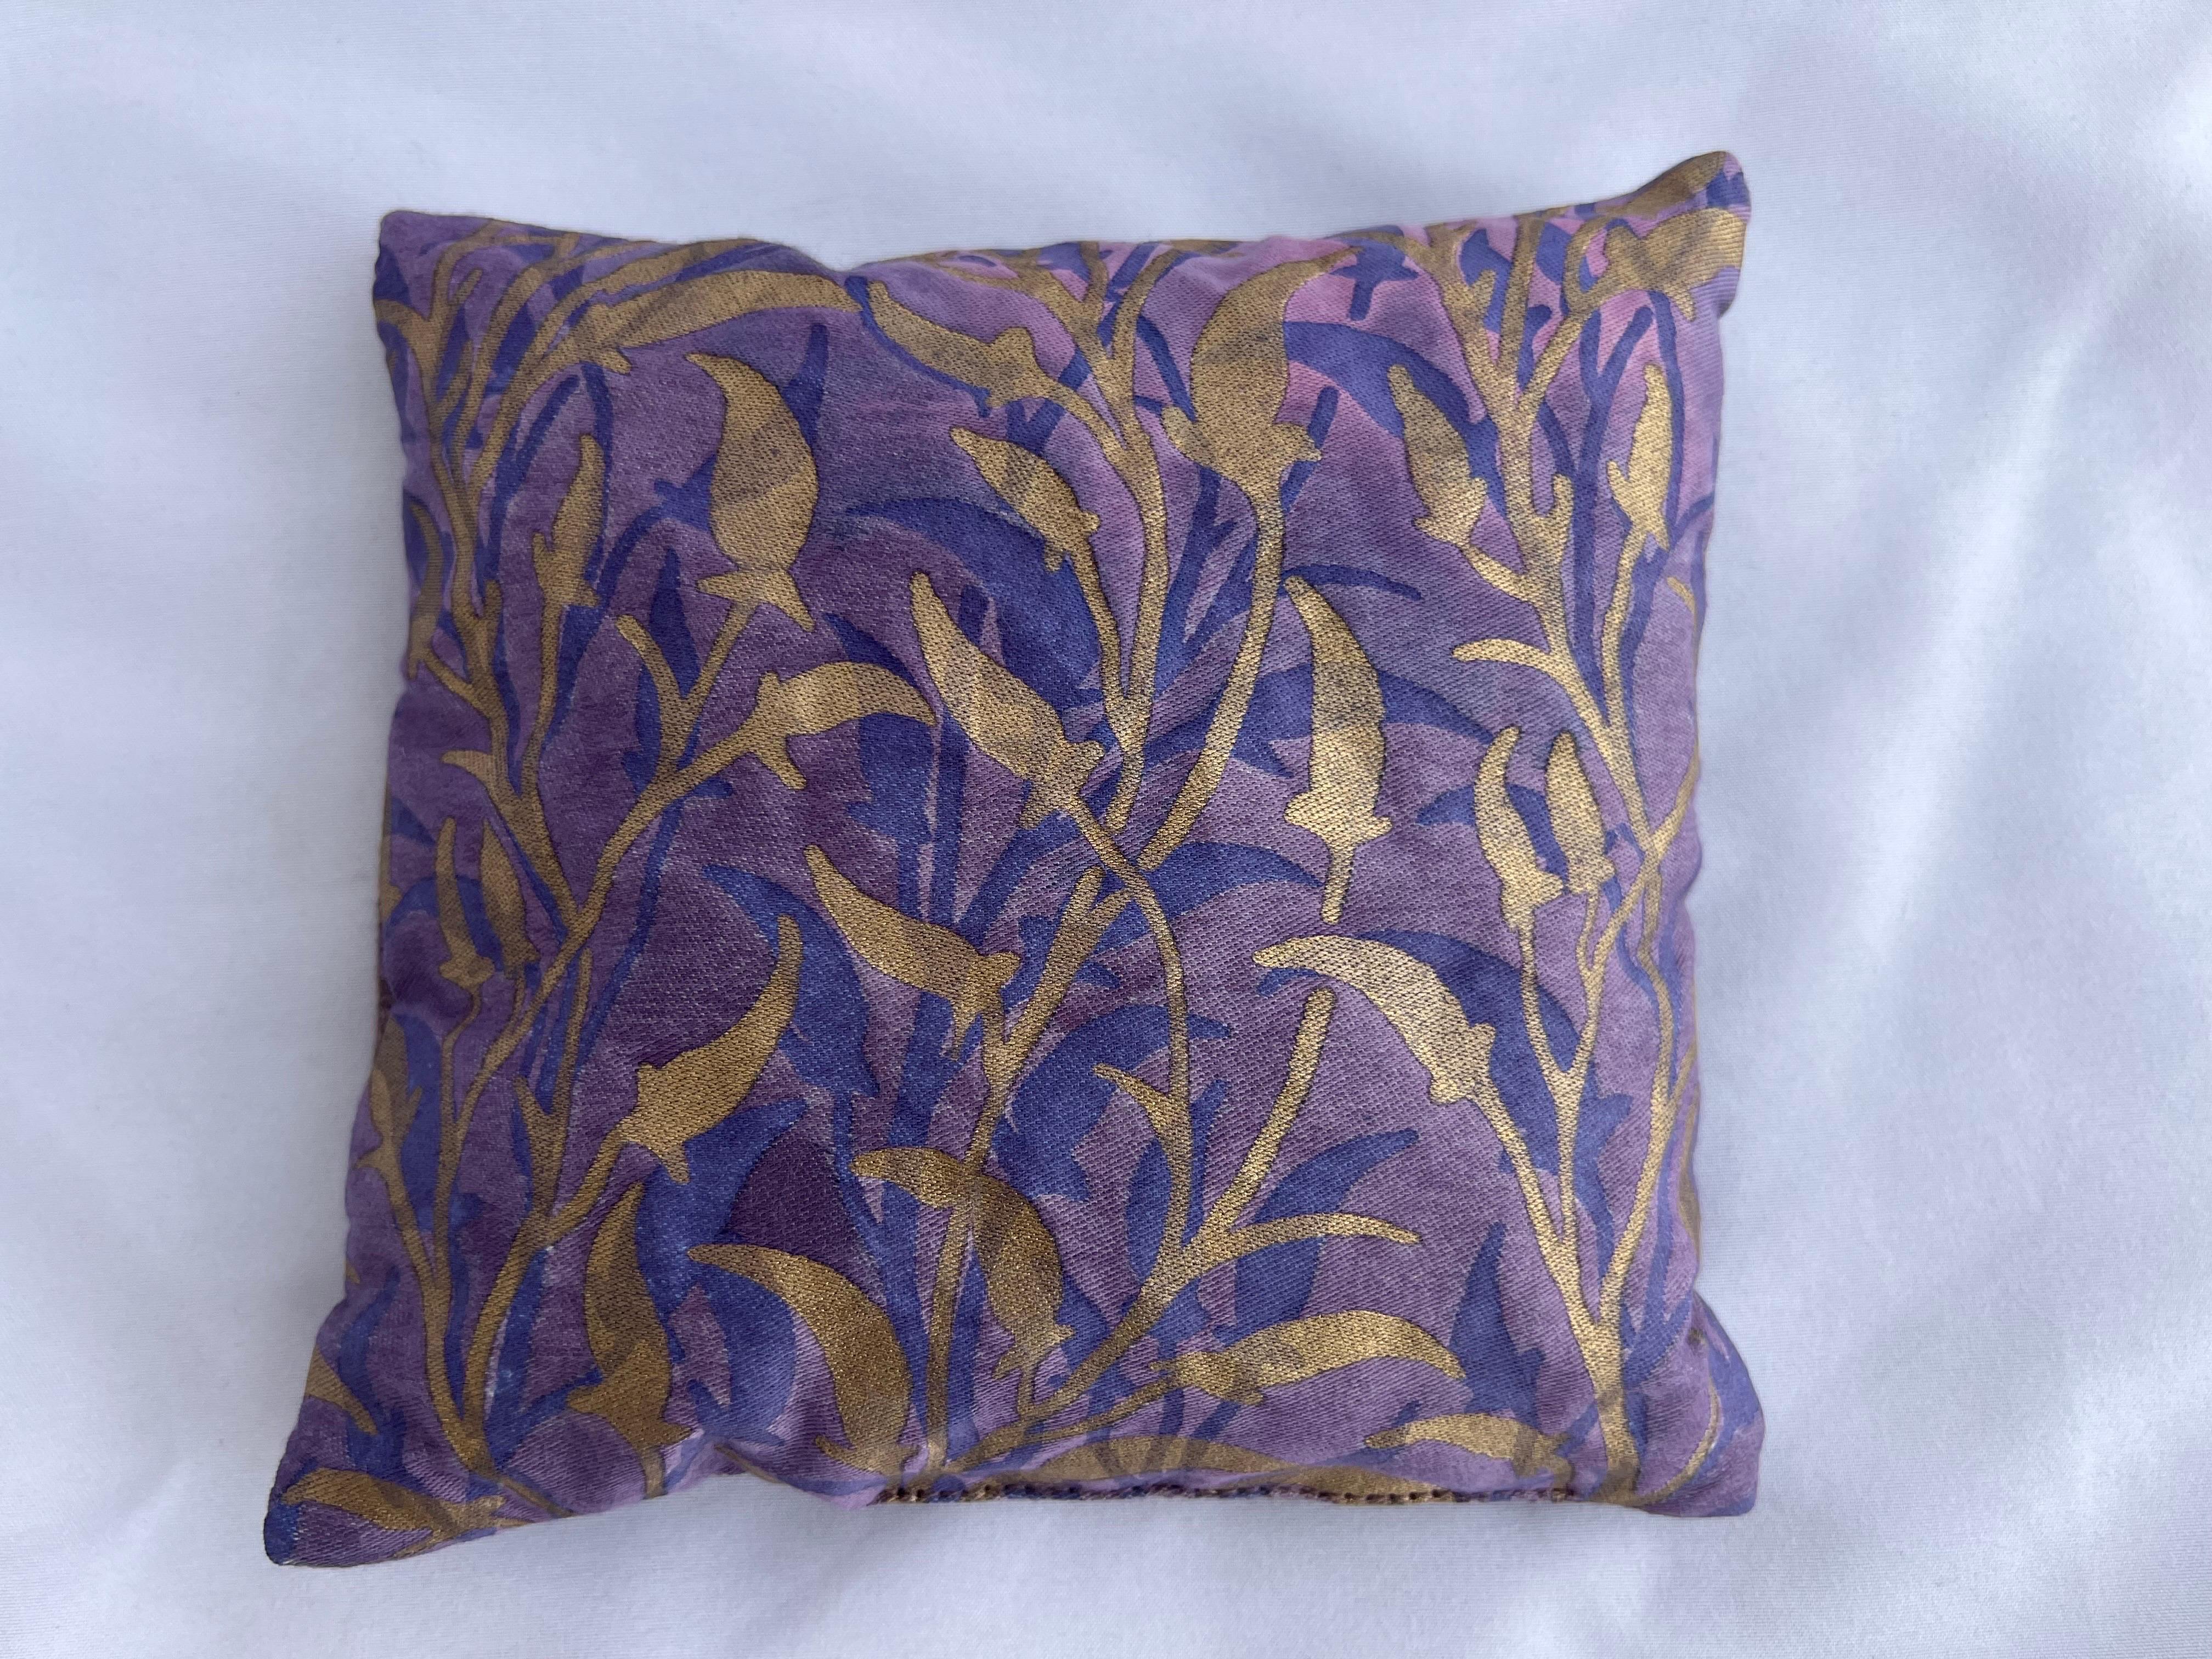 Italian Orfeo Patterned Fortuny Lavender Sachet  For Sale